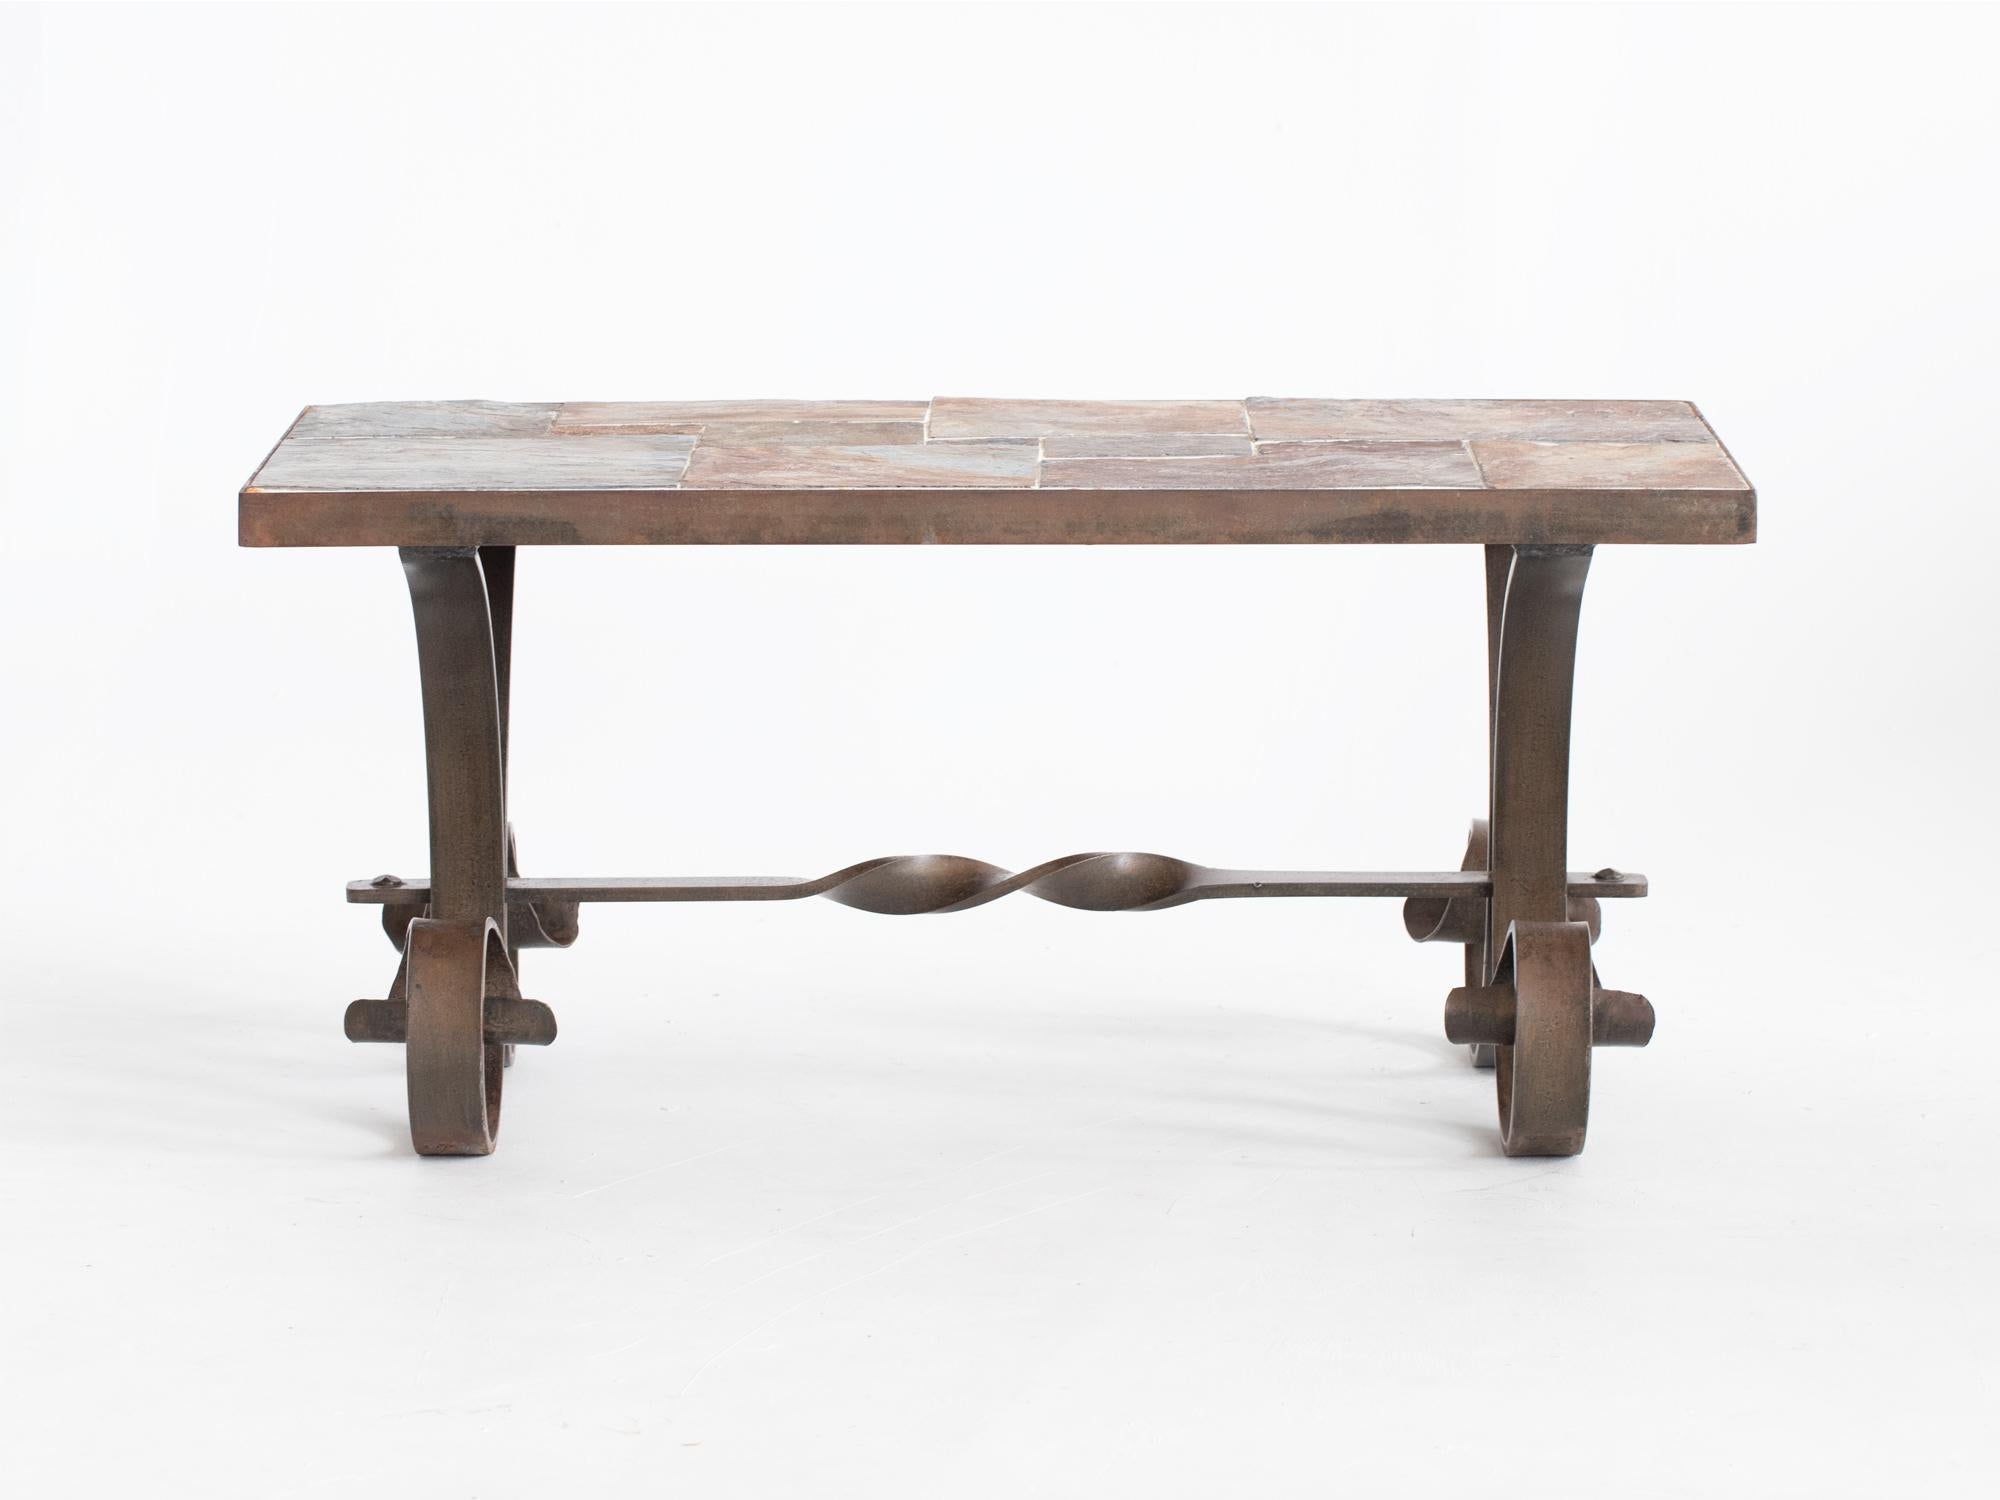 A mid century slate and wrought iron coffee table. French, mid 20C.

Stock ref. #2388

A heavy and solid piece. Patinated iron surface with undamaged tiles.

45 x 97 x 48.5 cm

17.7 x 38.2 x 19.1 